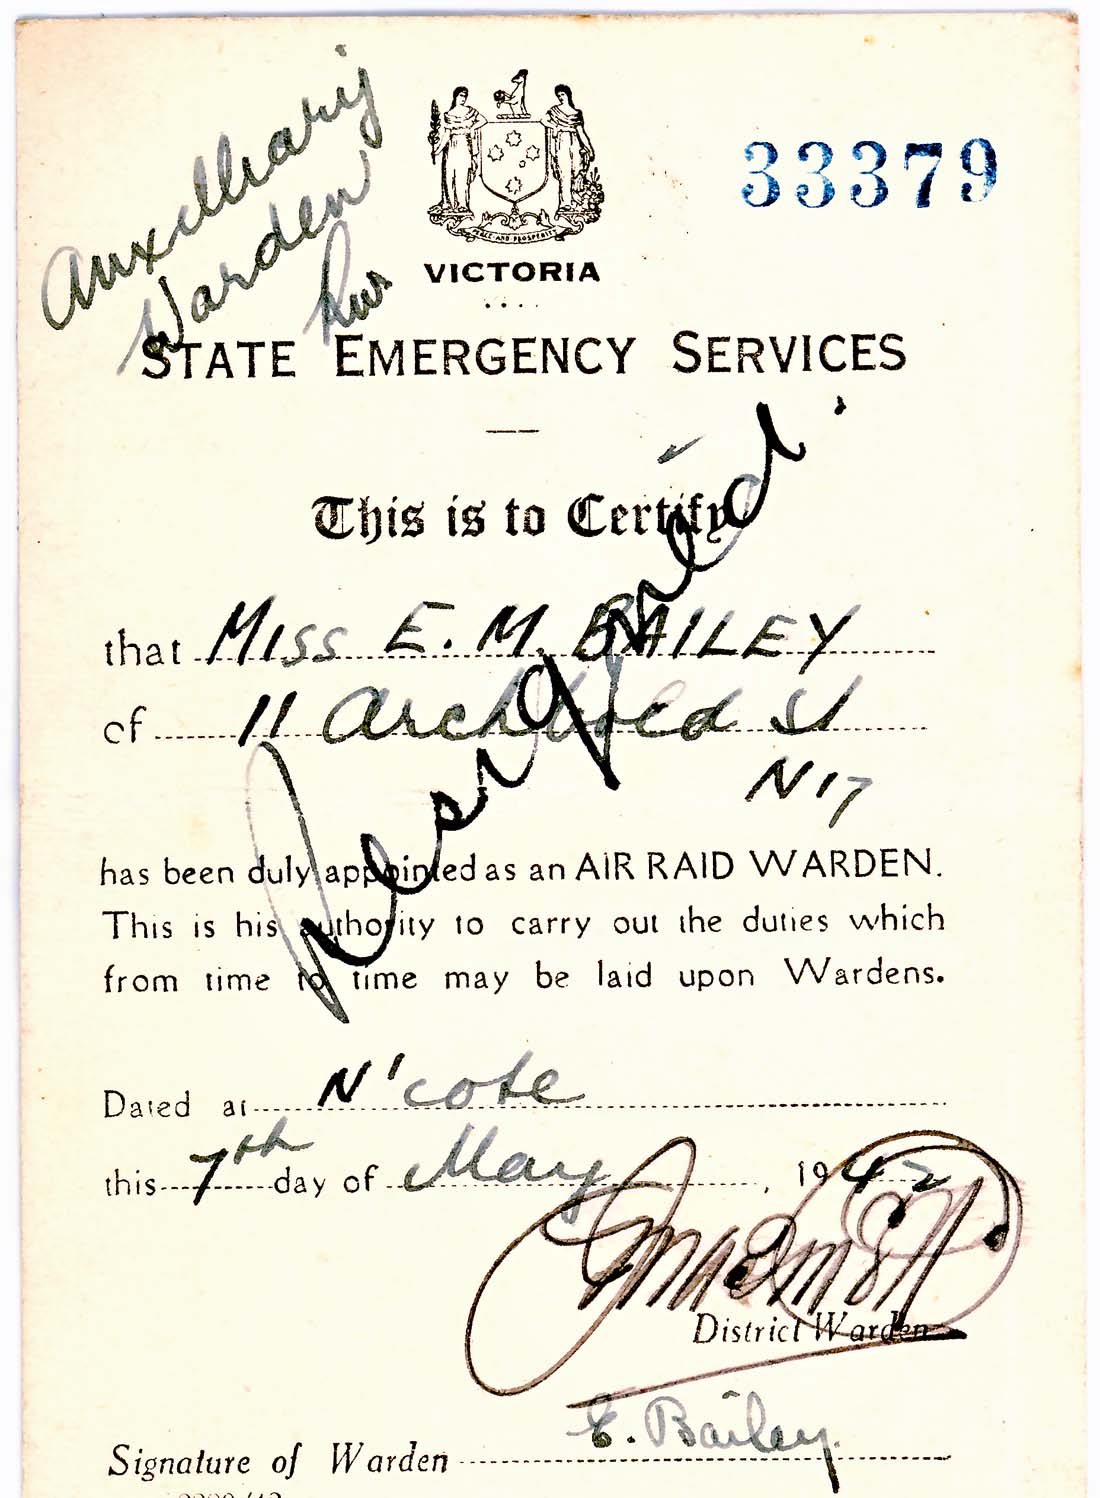 Image of Identification paper for Miss E. M. Bailey, Air Warden